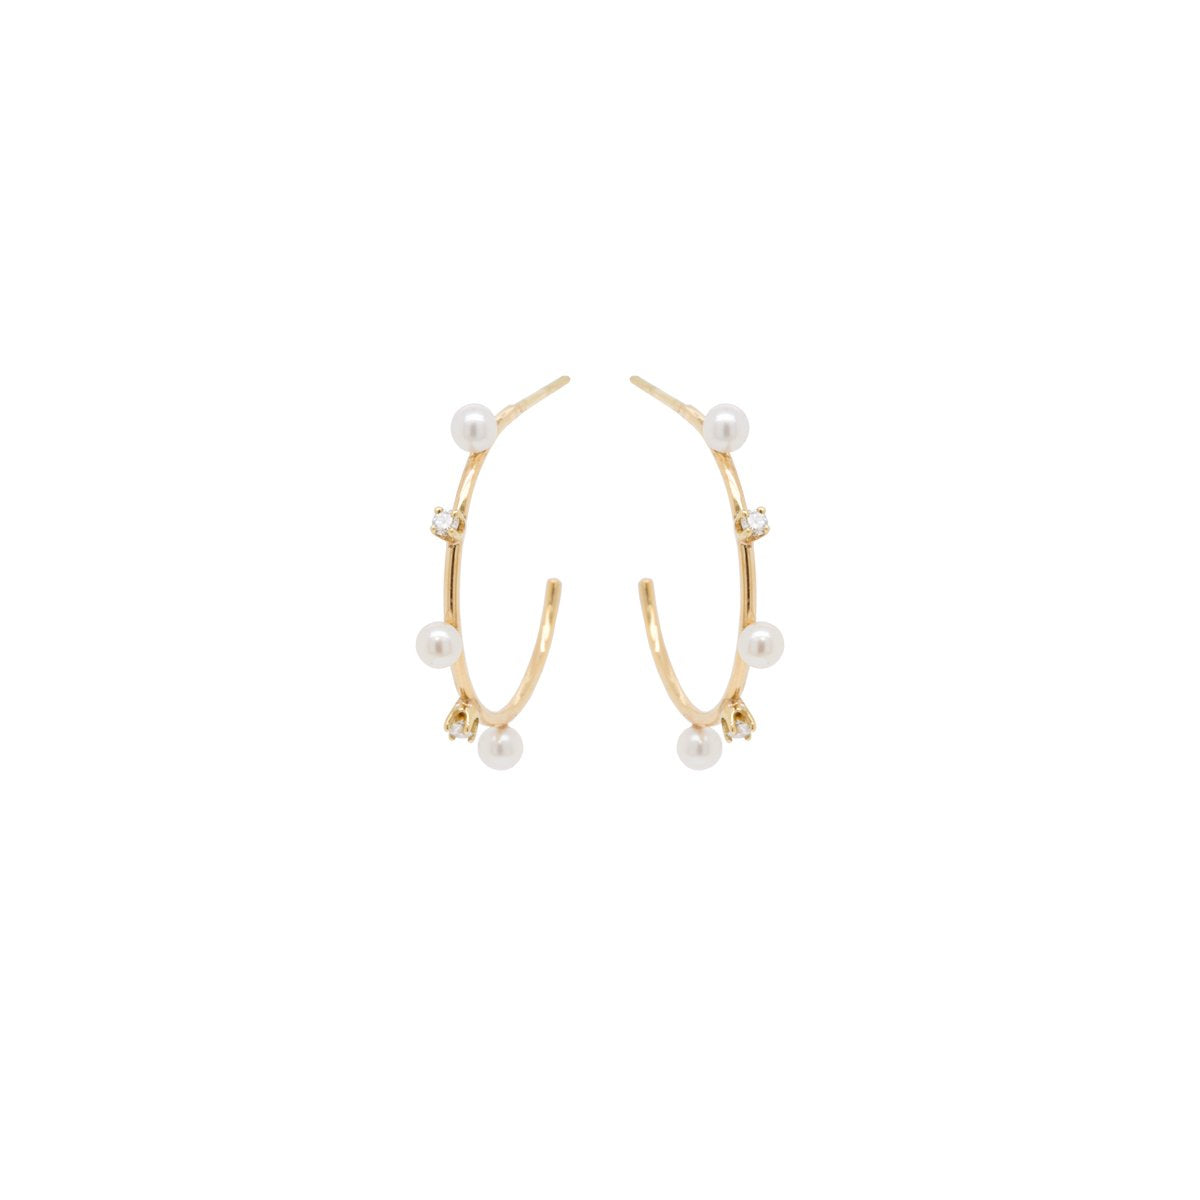 Hoops with Pearl and Diamond Earrings